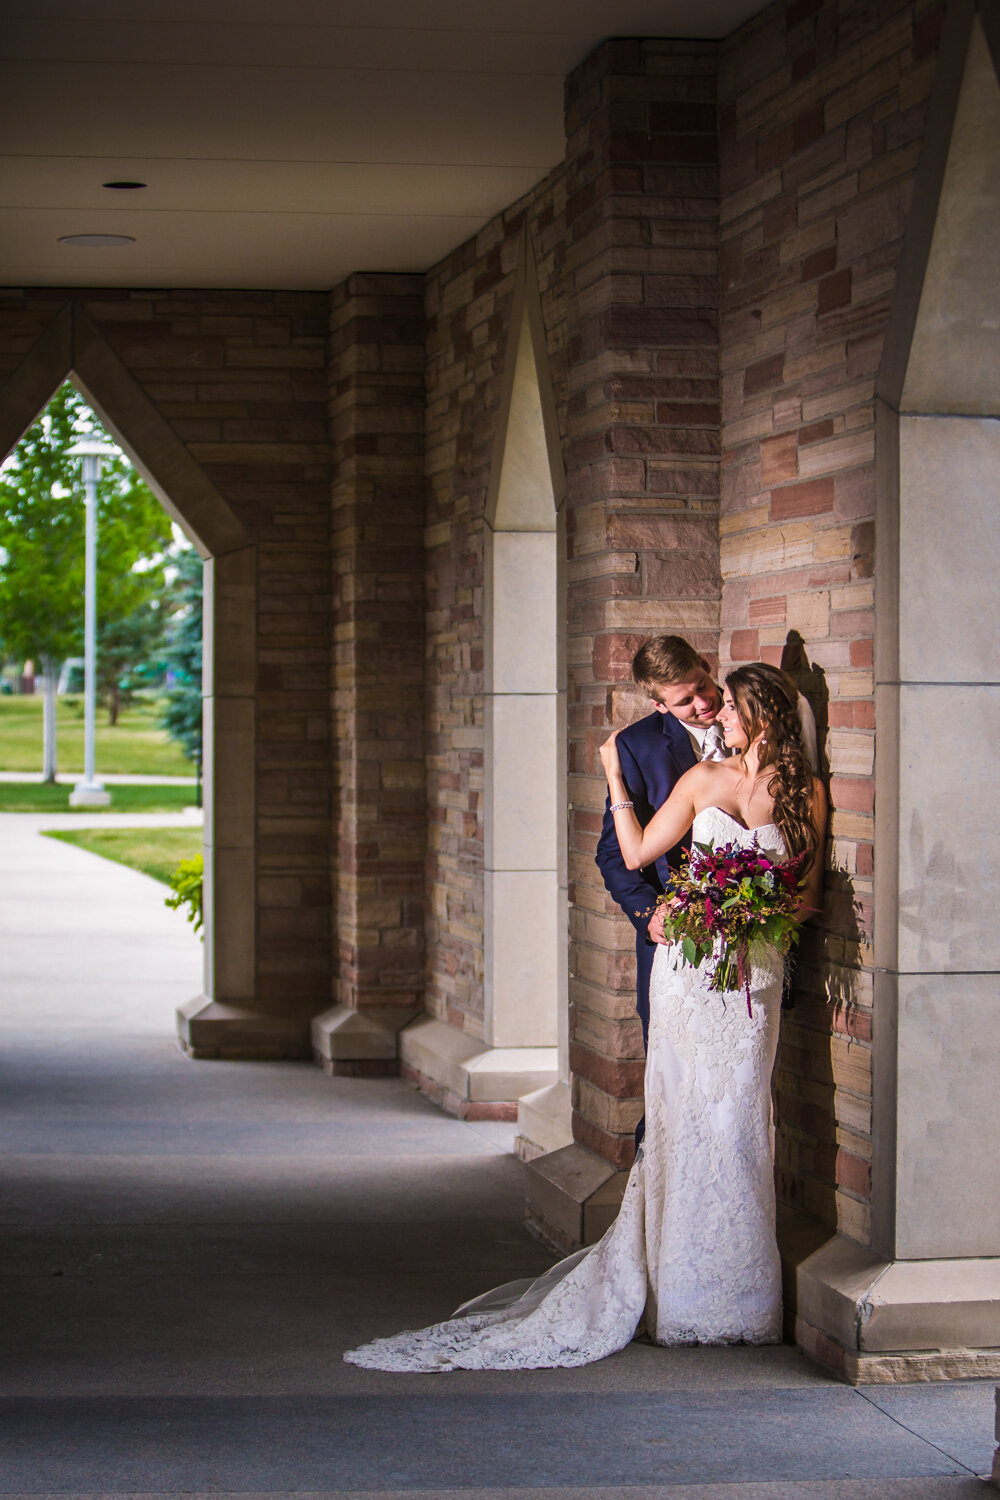  Bride and groom outside Cherry Hills Community Church.&nbsp;  hotographed by JMGant Photography, Denver Colorado wedding photographer.&nbsp; 